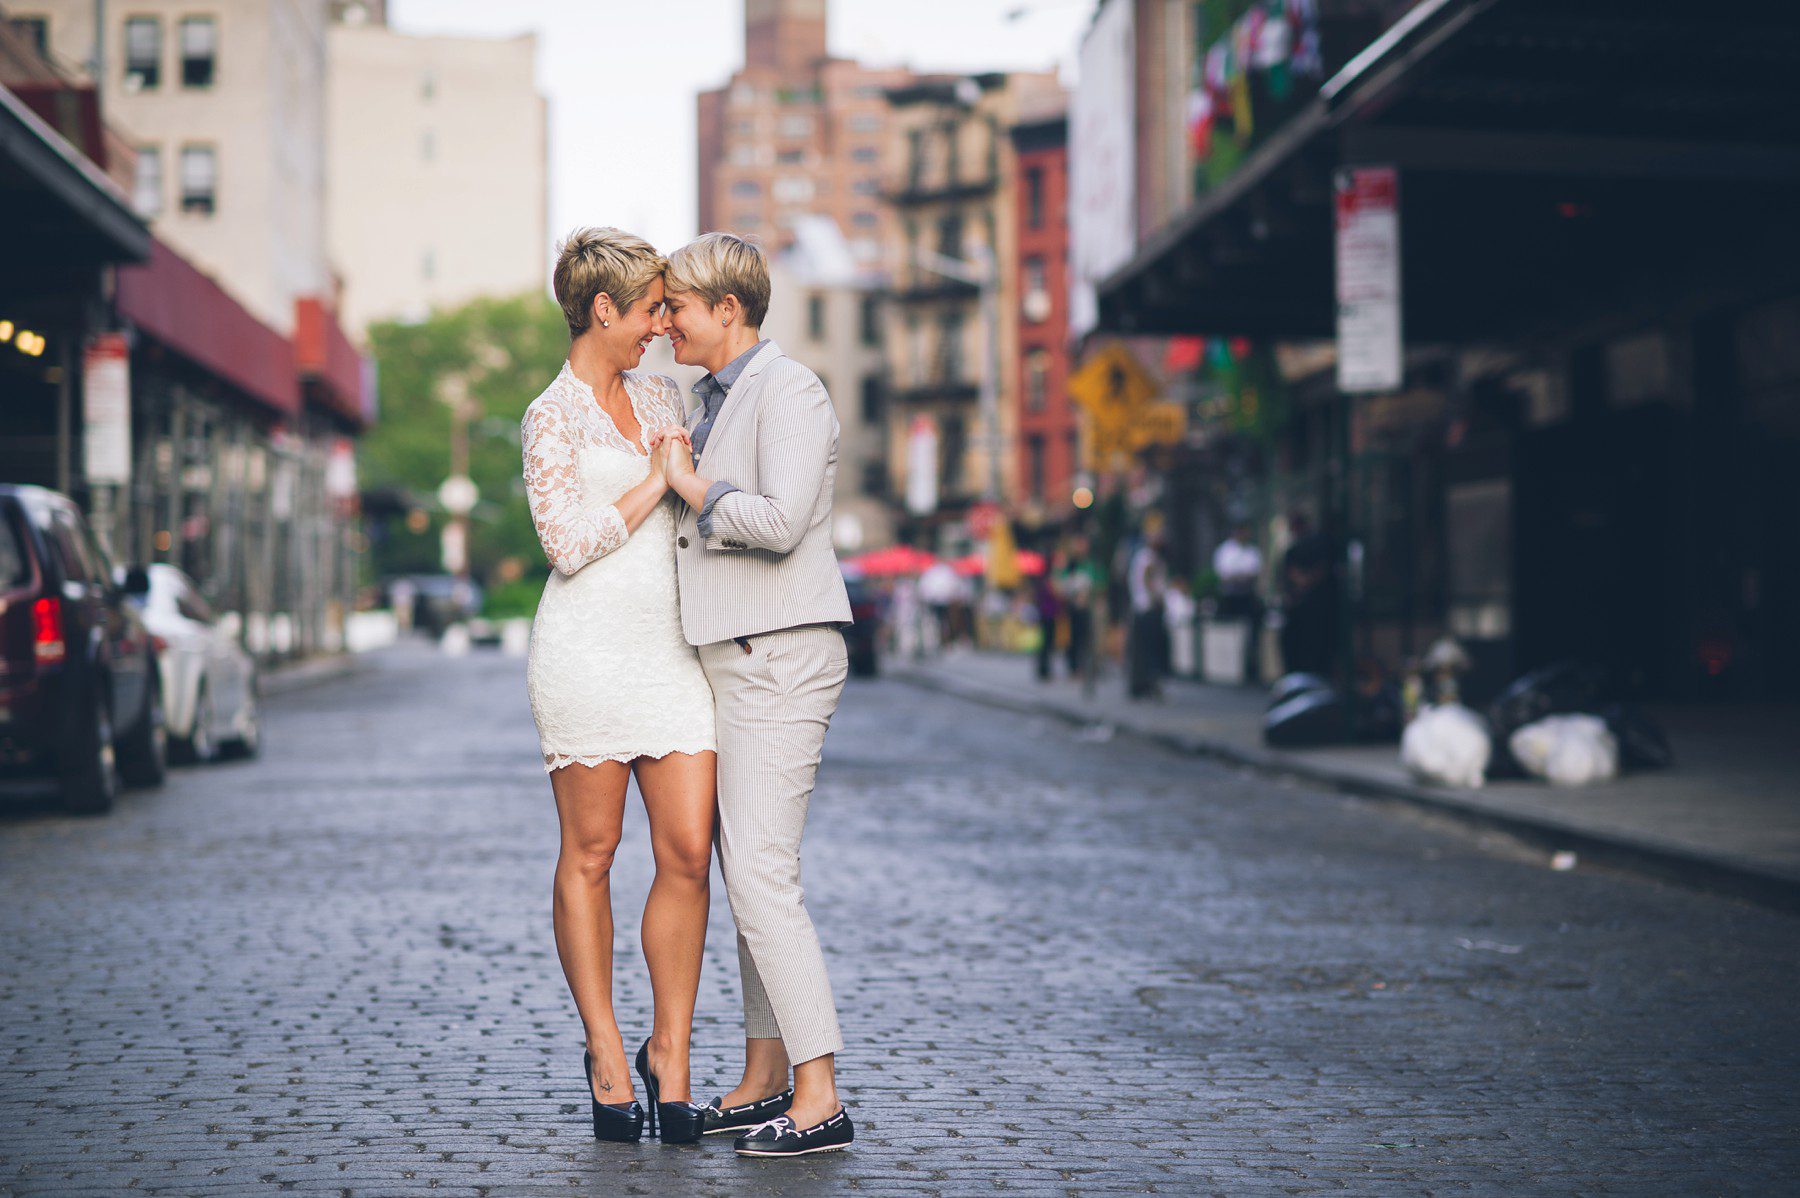 Meatpacking District,elope in new york,elopement in NYC,heiraten in new york,love is love,